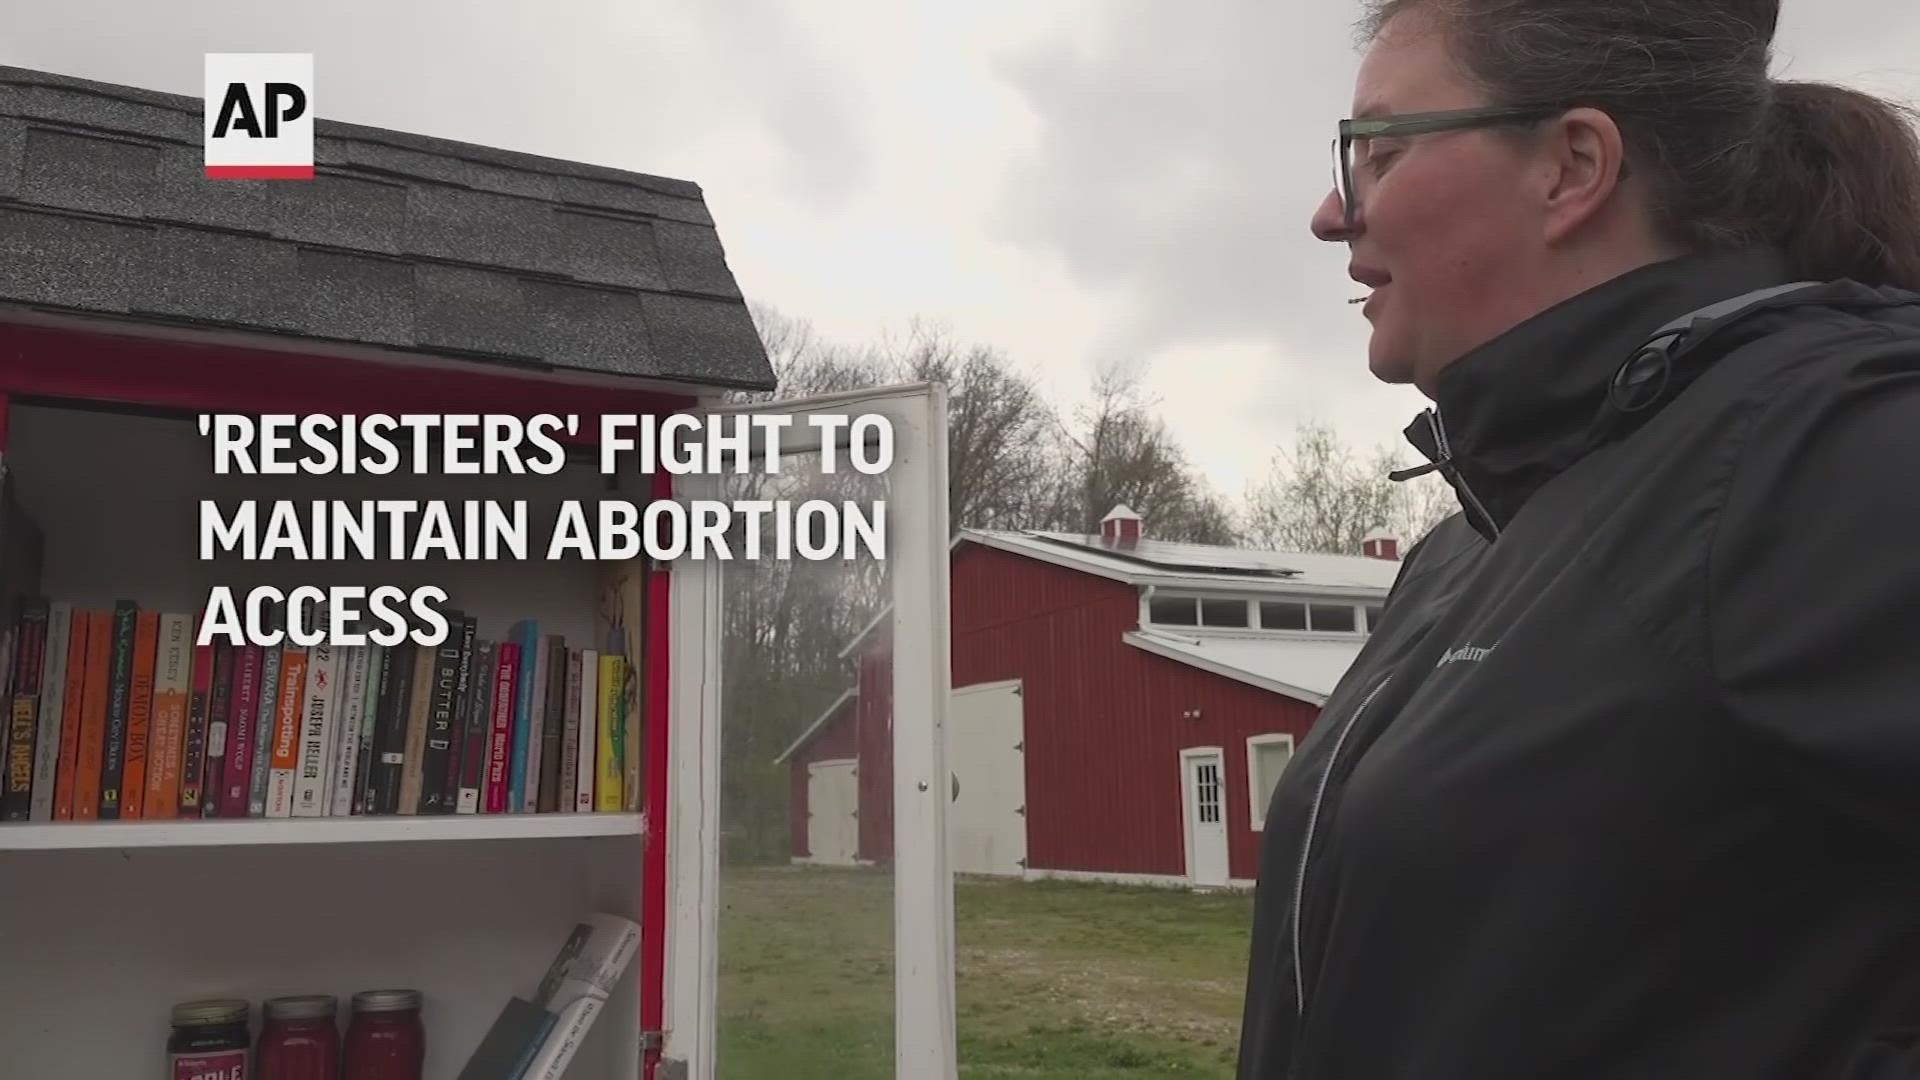 Some abortion activists are finding new ways to make sure women living in states with restrictive abortion laws can still get access to services.